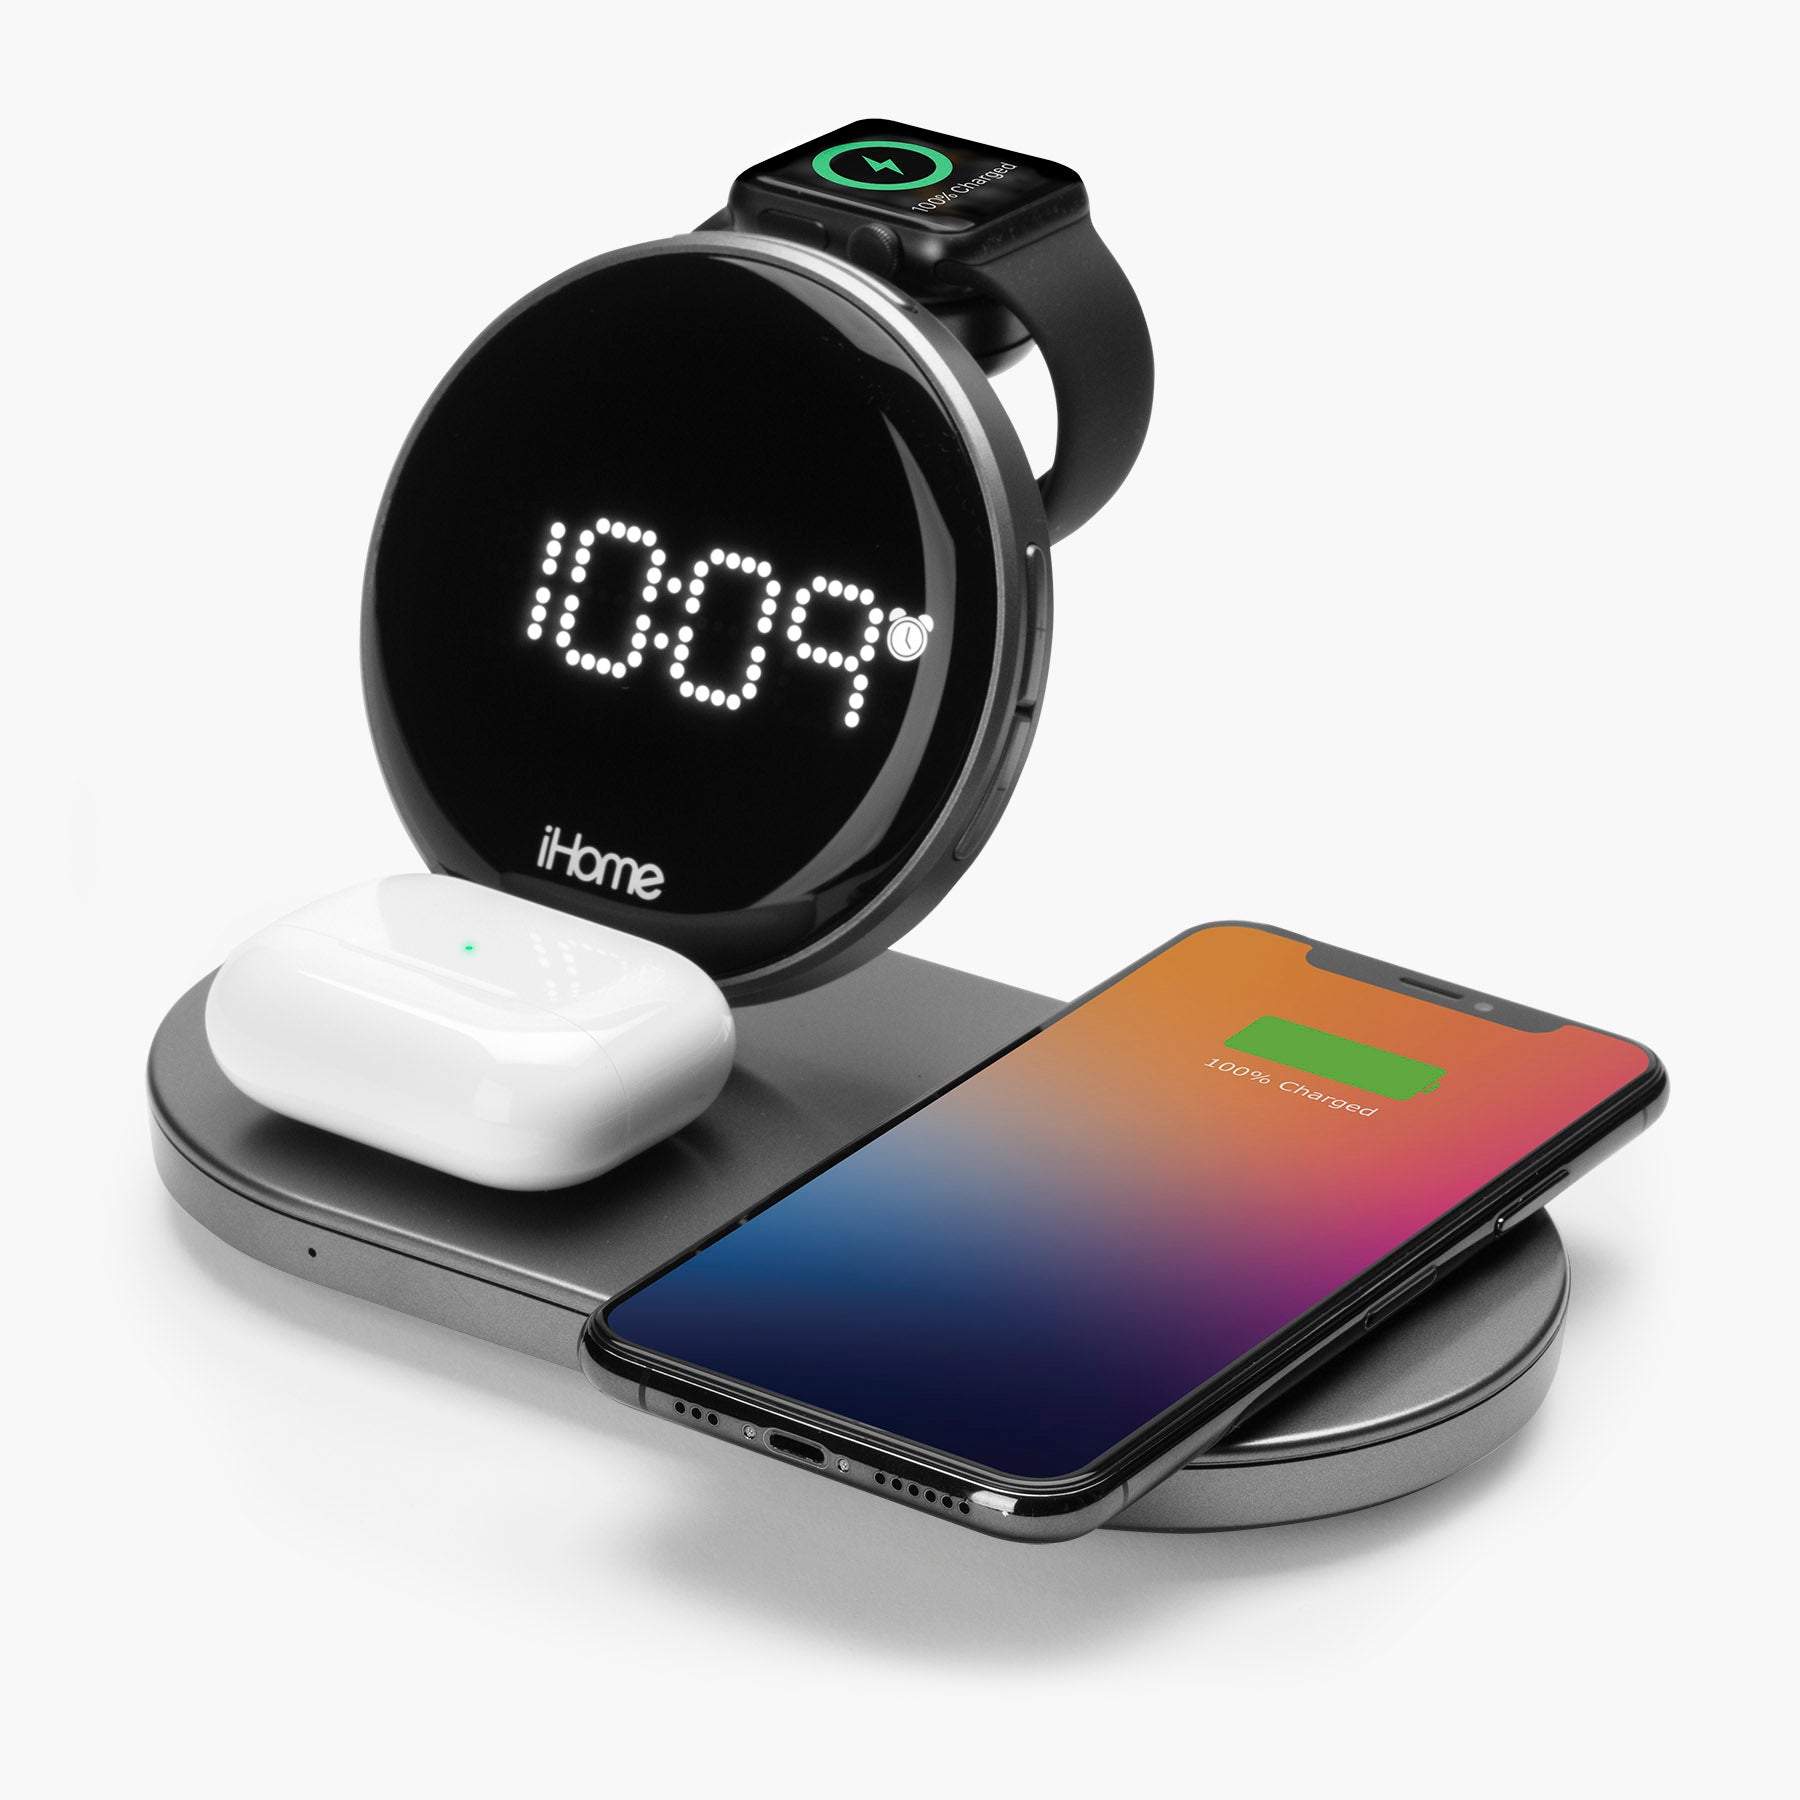 Charging Station with Wireless Charger, Apple Watch Charger, AirPods Charger, USB Charging (iWW33BGOL)